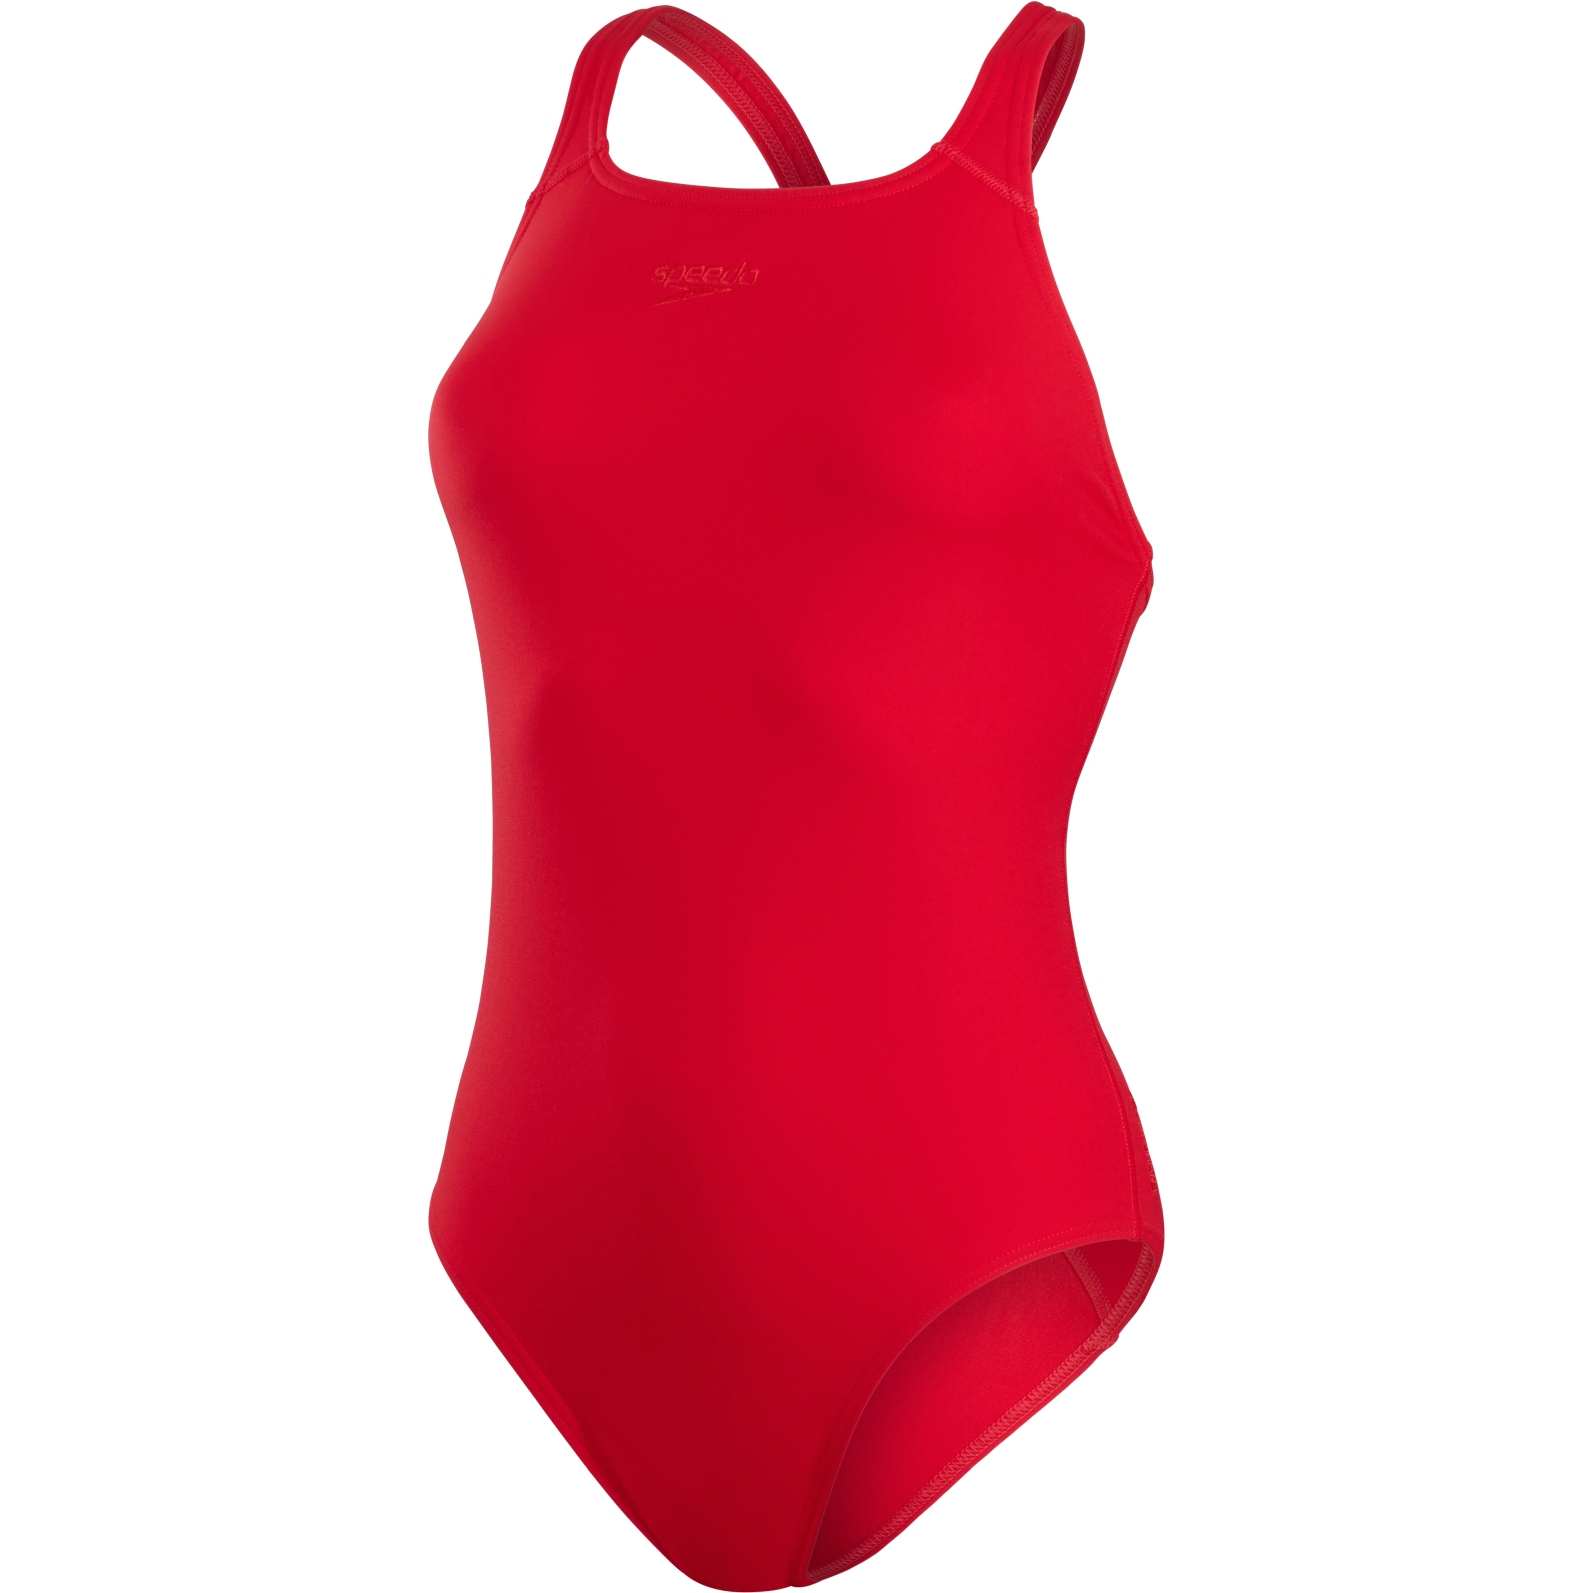 Picture of Speedo ECO Endurance+ Medalist Bathing Suit - fed red